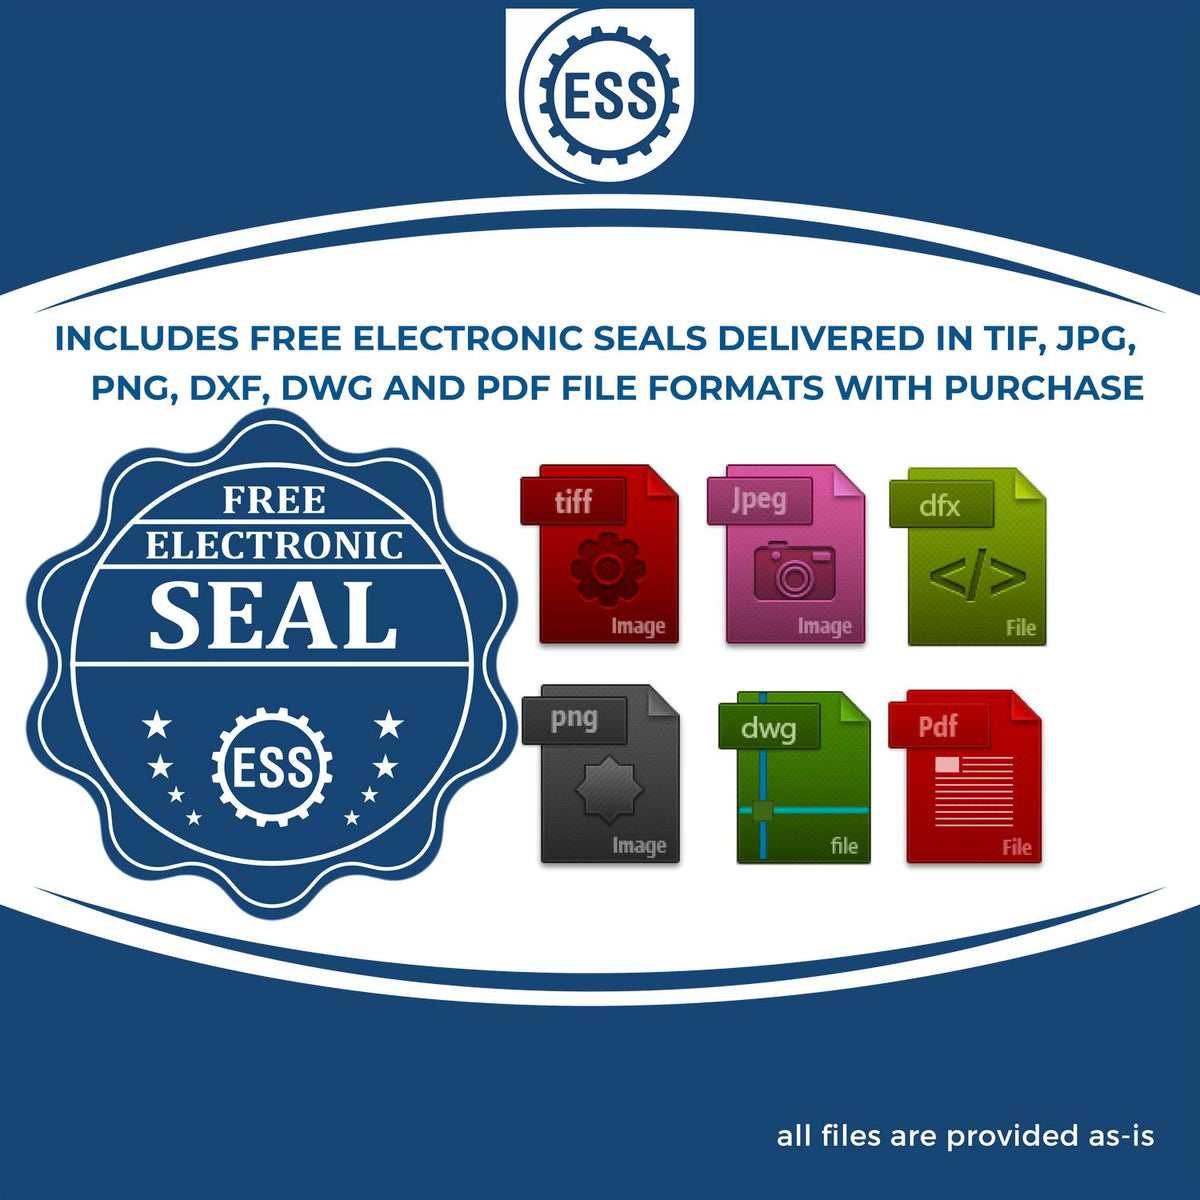 An infographic for the free electronic seal for the Soft Wyoming Professional Geologist Seal illustrating the different file type icons such as DXF, DWG, TIF, JPG and PNG.